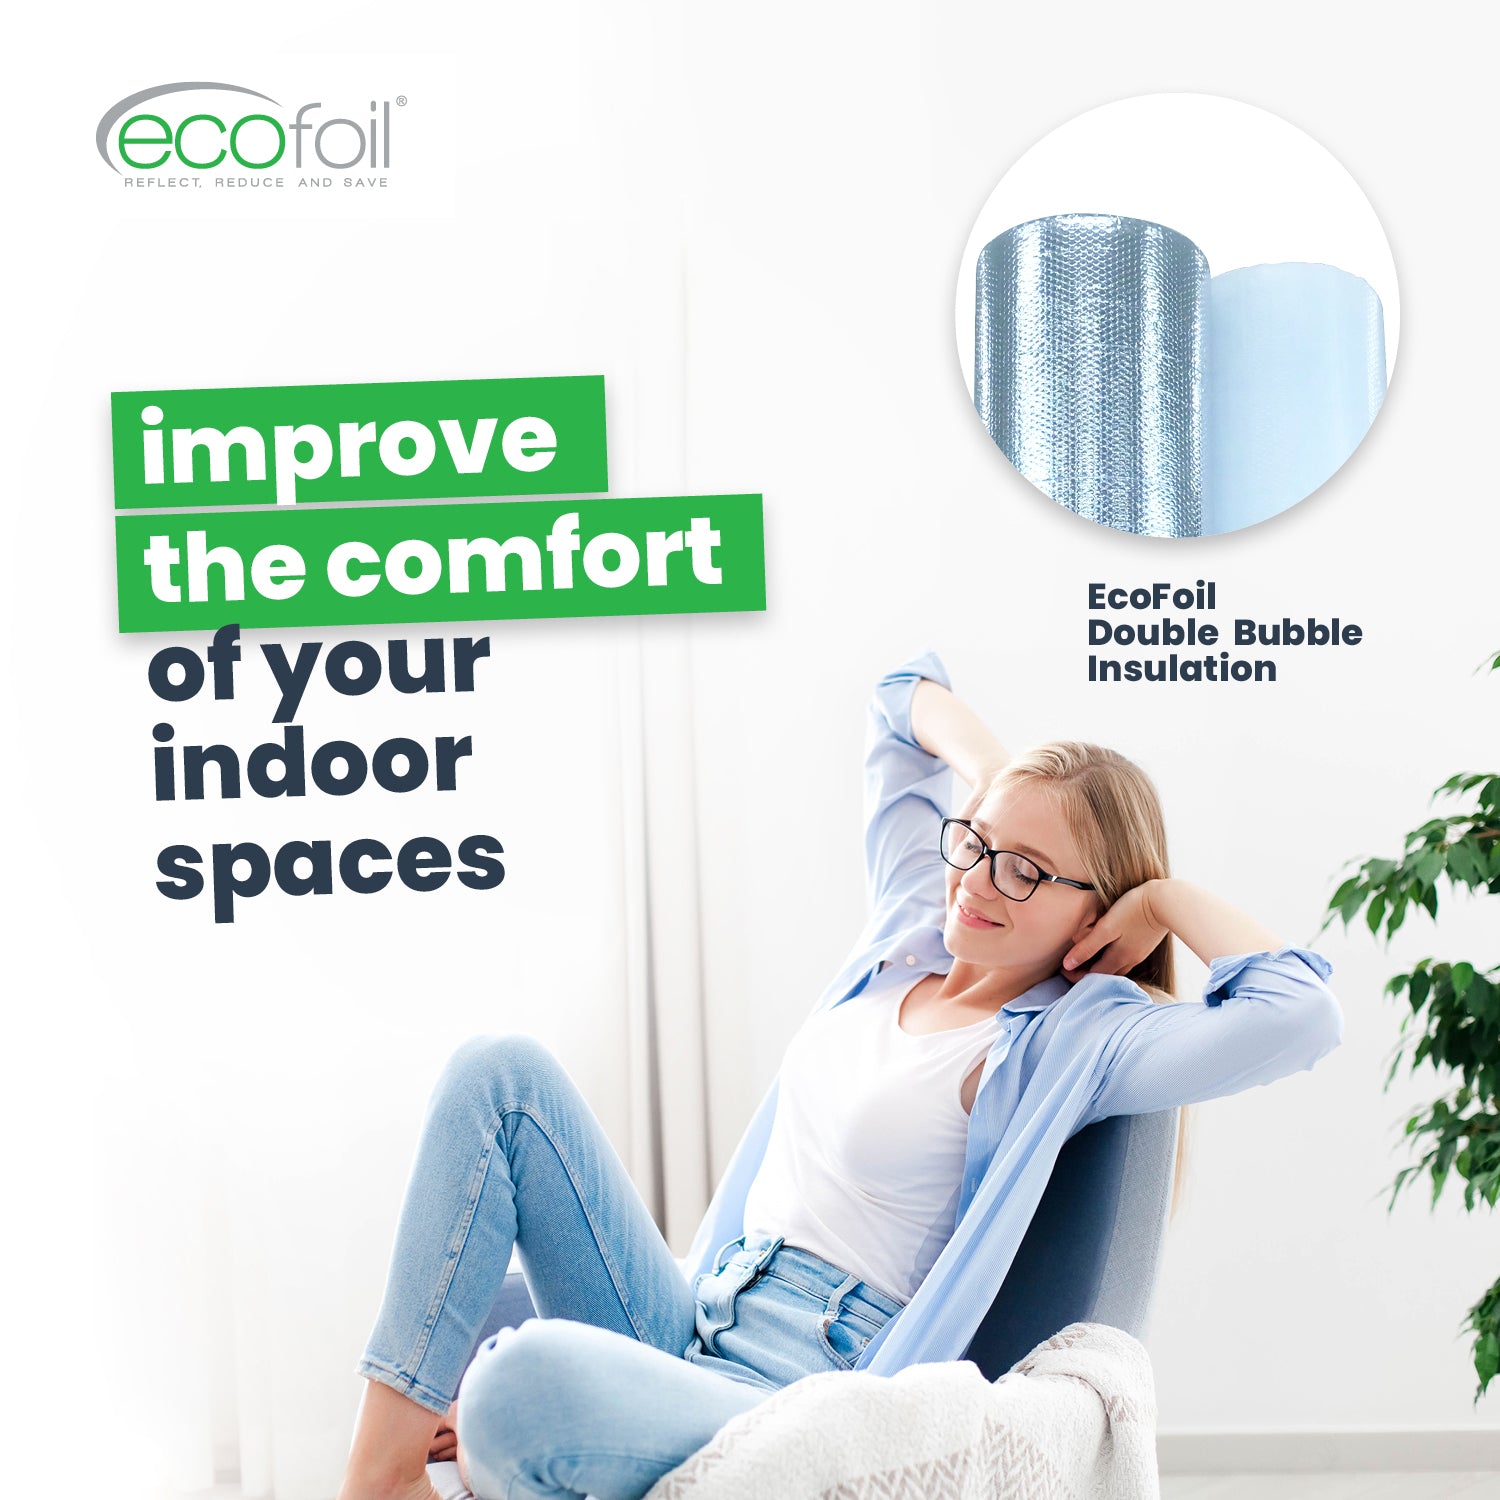 EcoFoil double bubble insulation improves the comfort of your indoor spaces